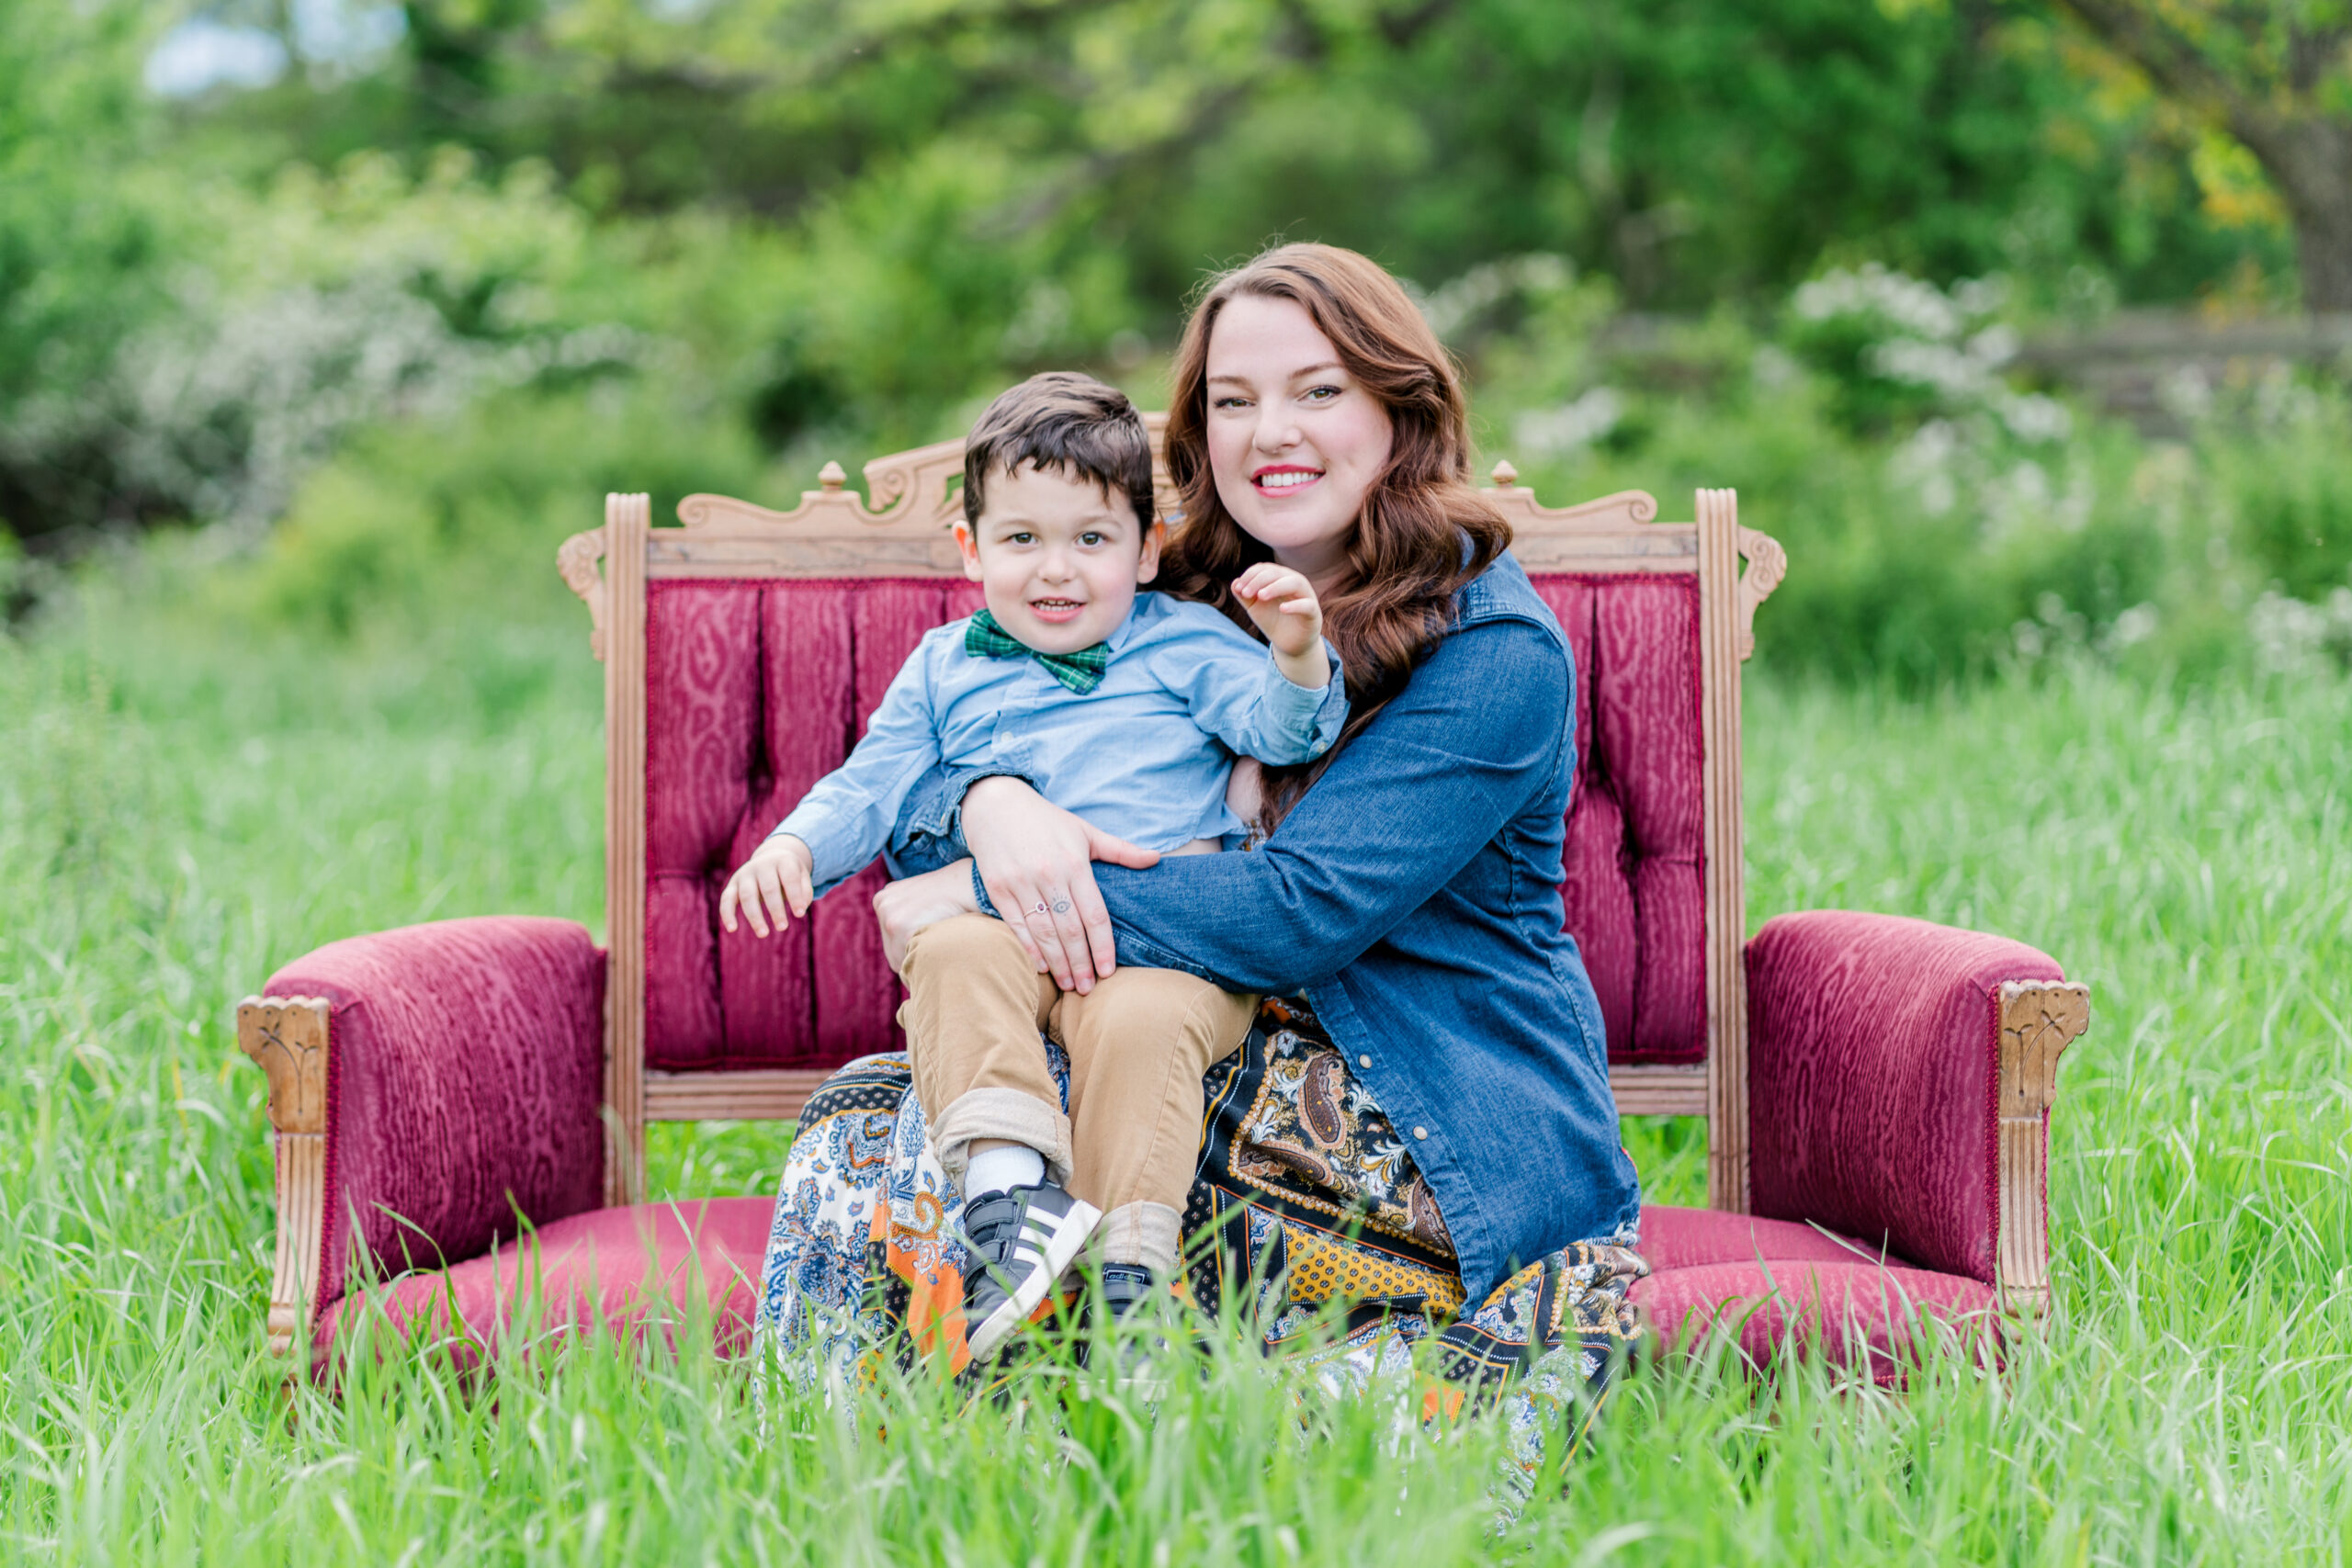 Mom Katy sits on a red vintage loveseat in a green field filled with tall grass. Her son Davis sits in her lap